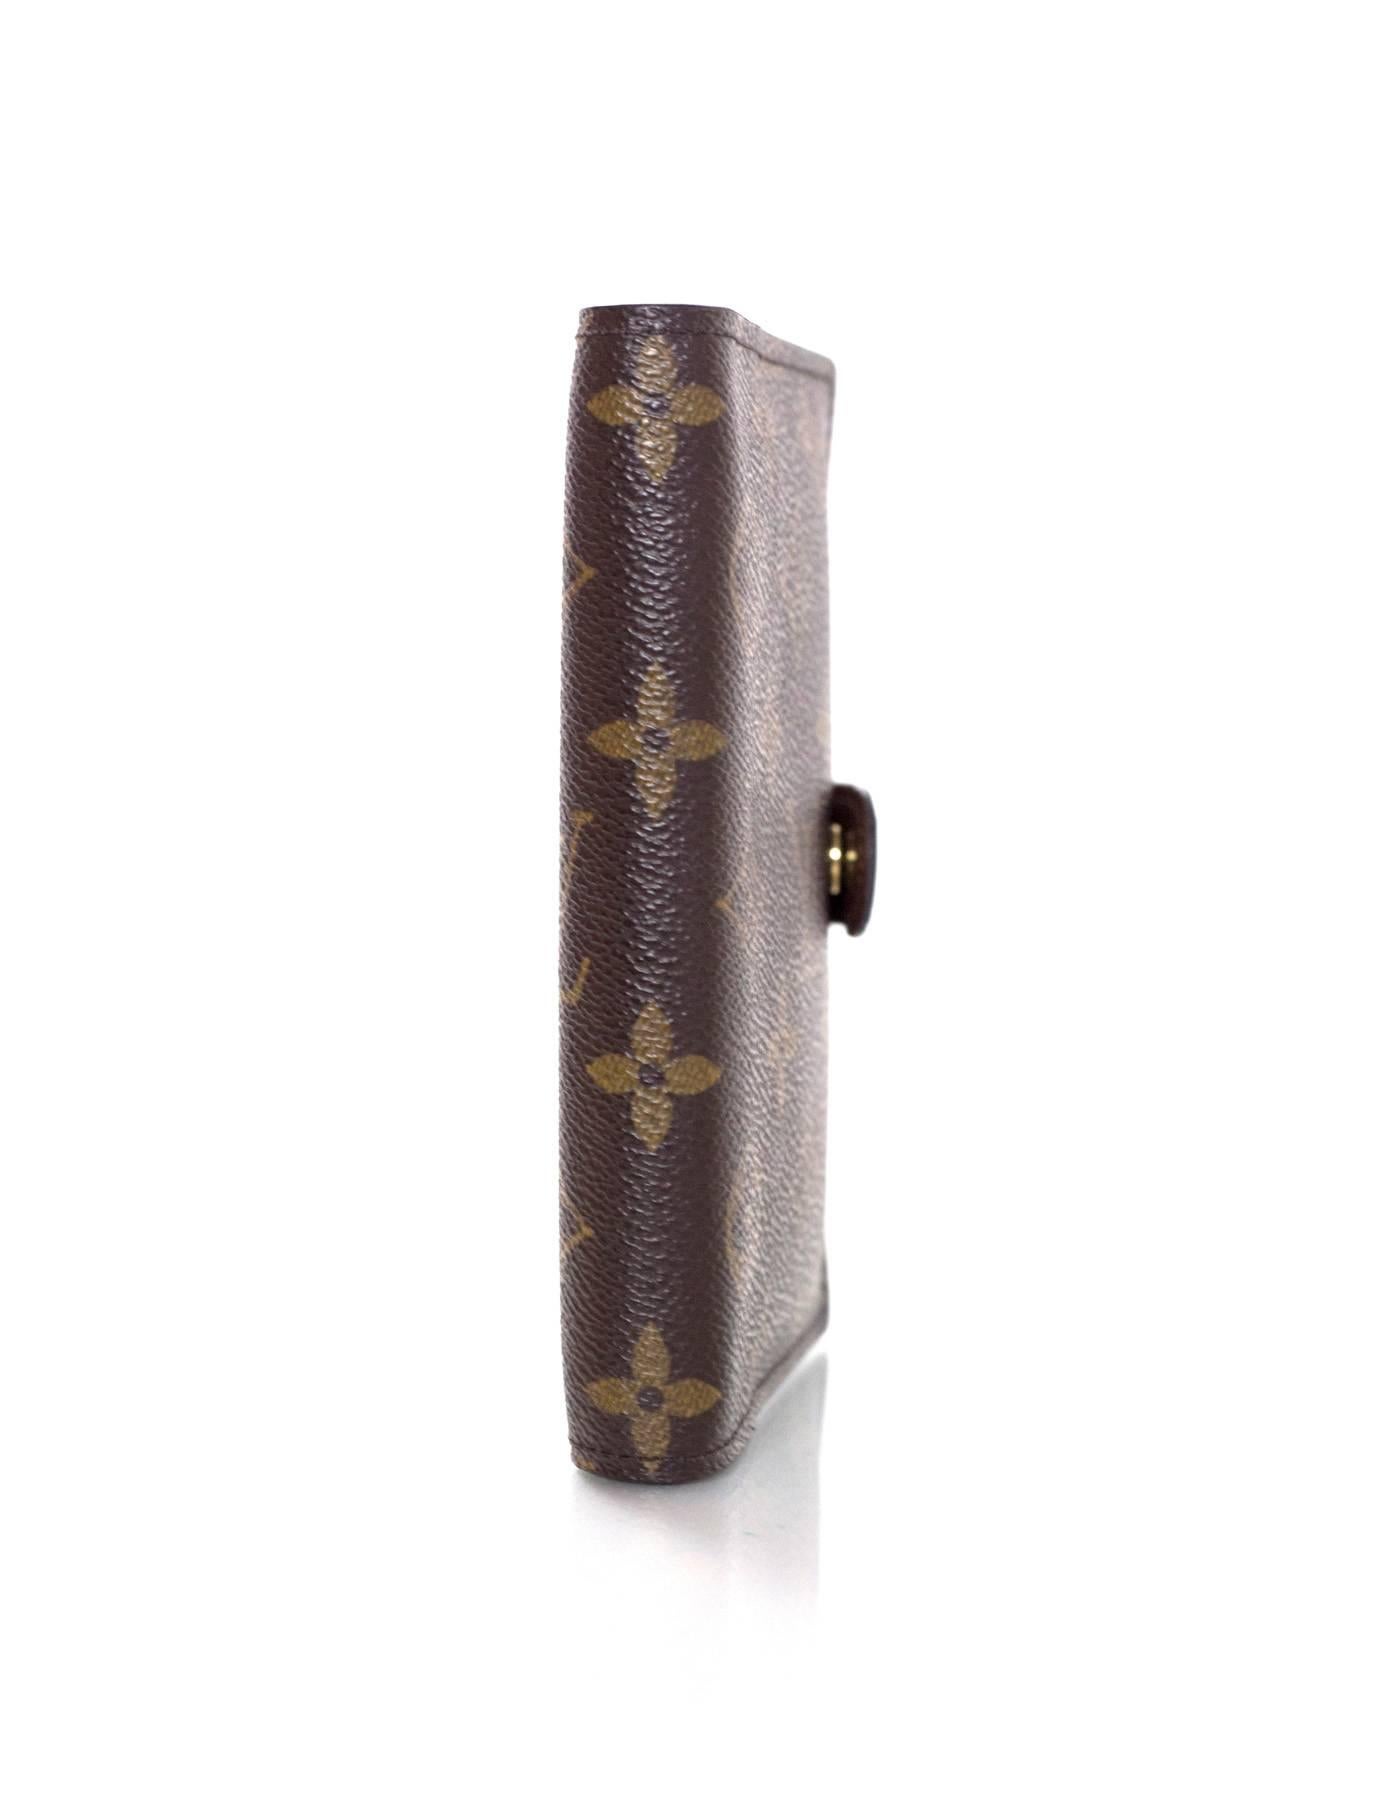 Louis Vuitton Monogram Small Ring Agenda Cover
Features 3 rings for agenda on interior with attached small ruler

Made In: USA
Year of Production: 2003
Color: Brown
Hardware: Goldtone
Materials: Coated canvas
Lining: Brown coated